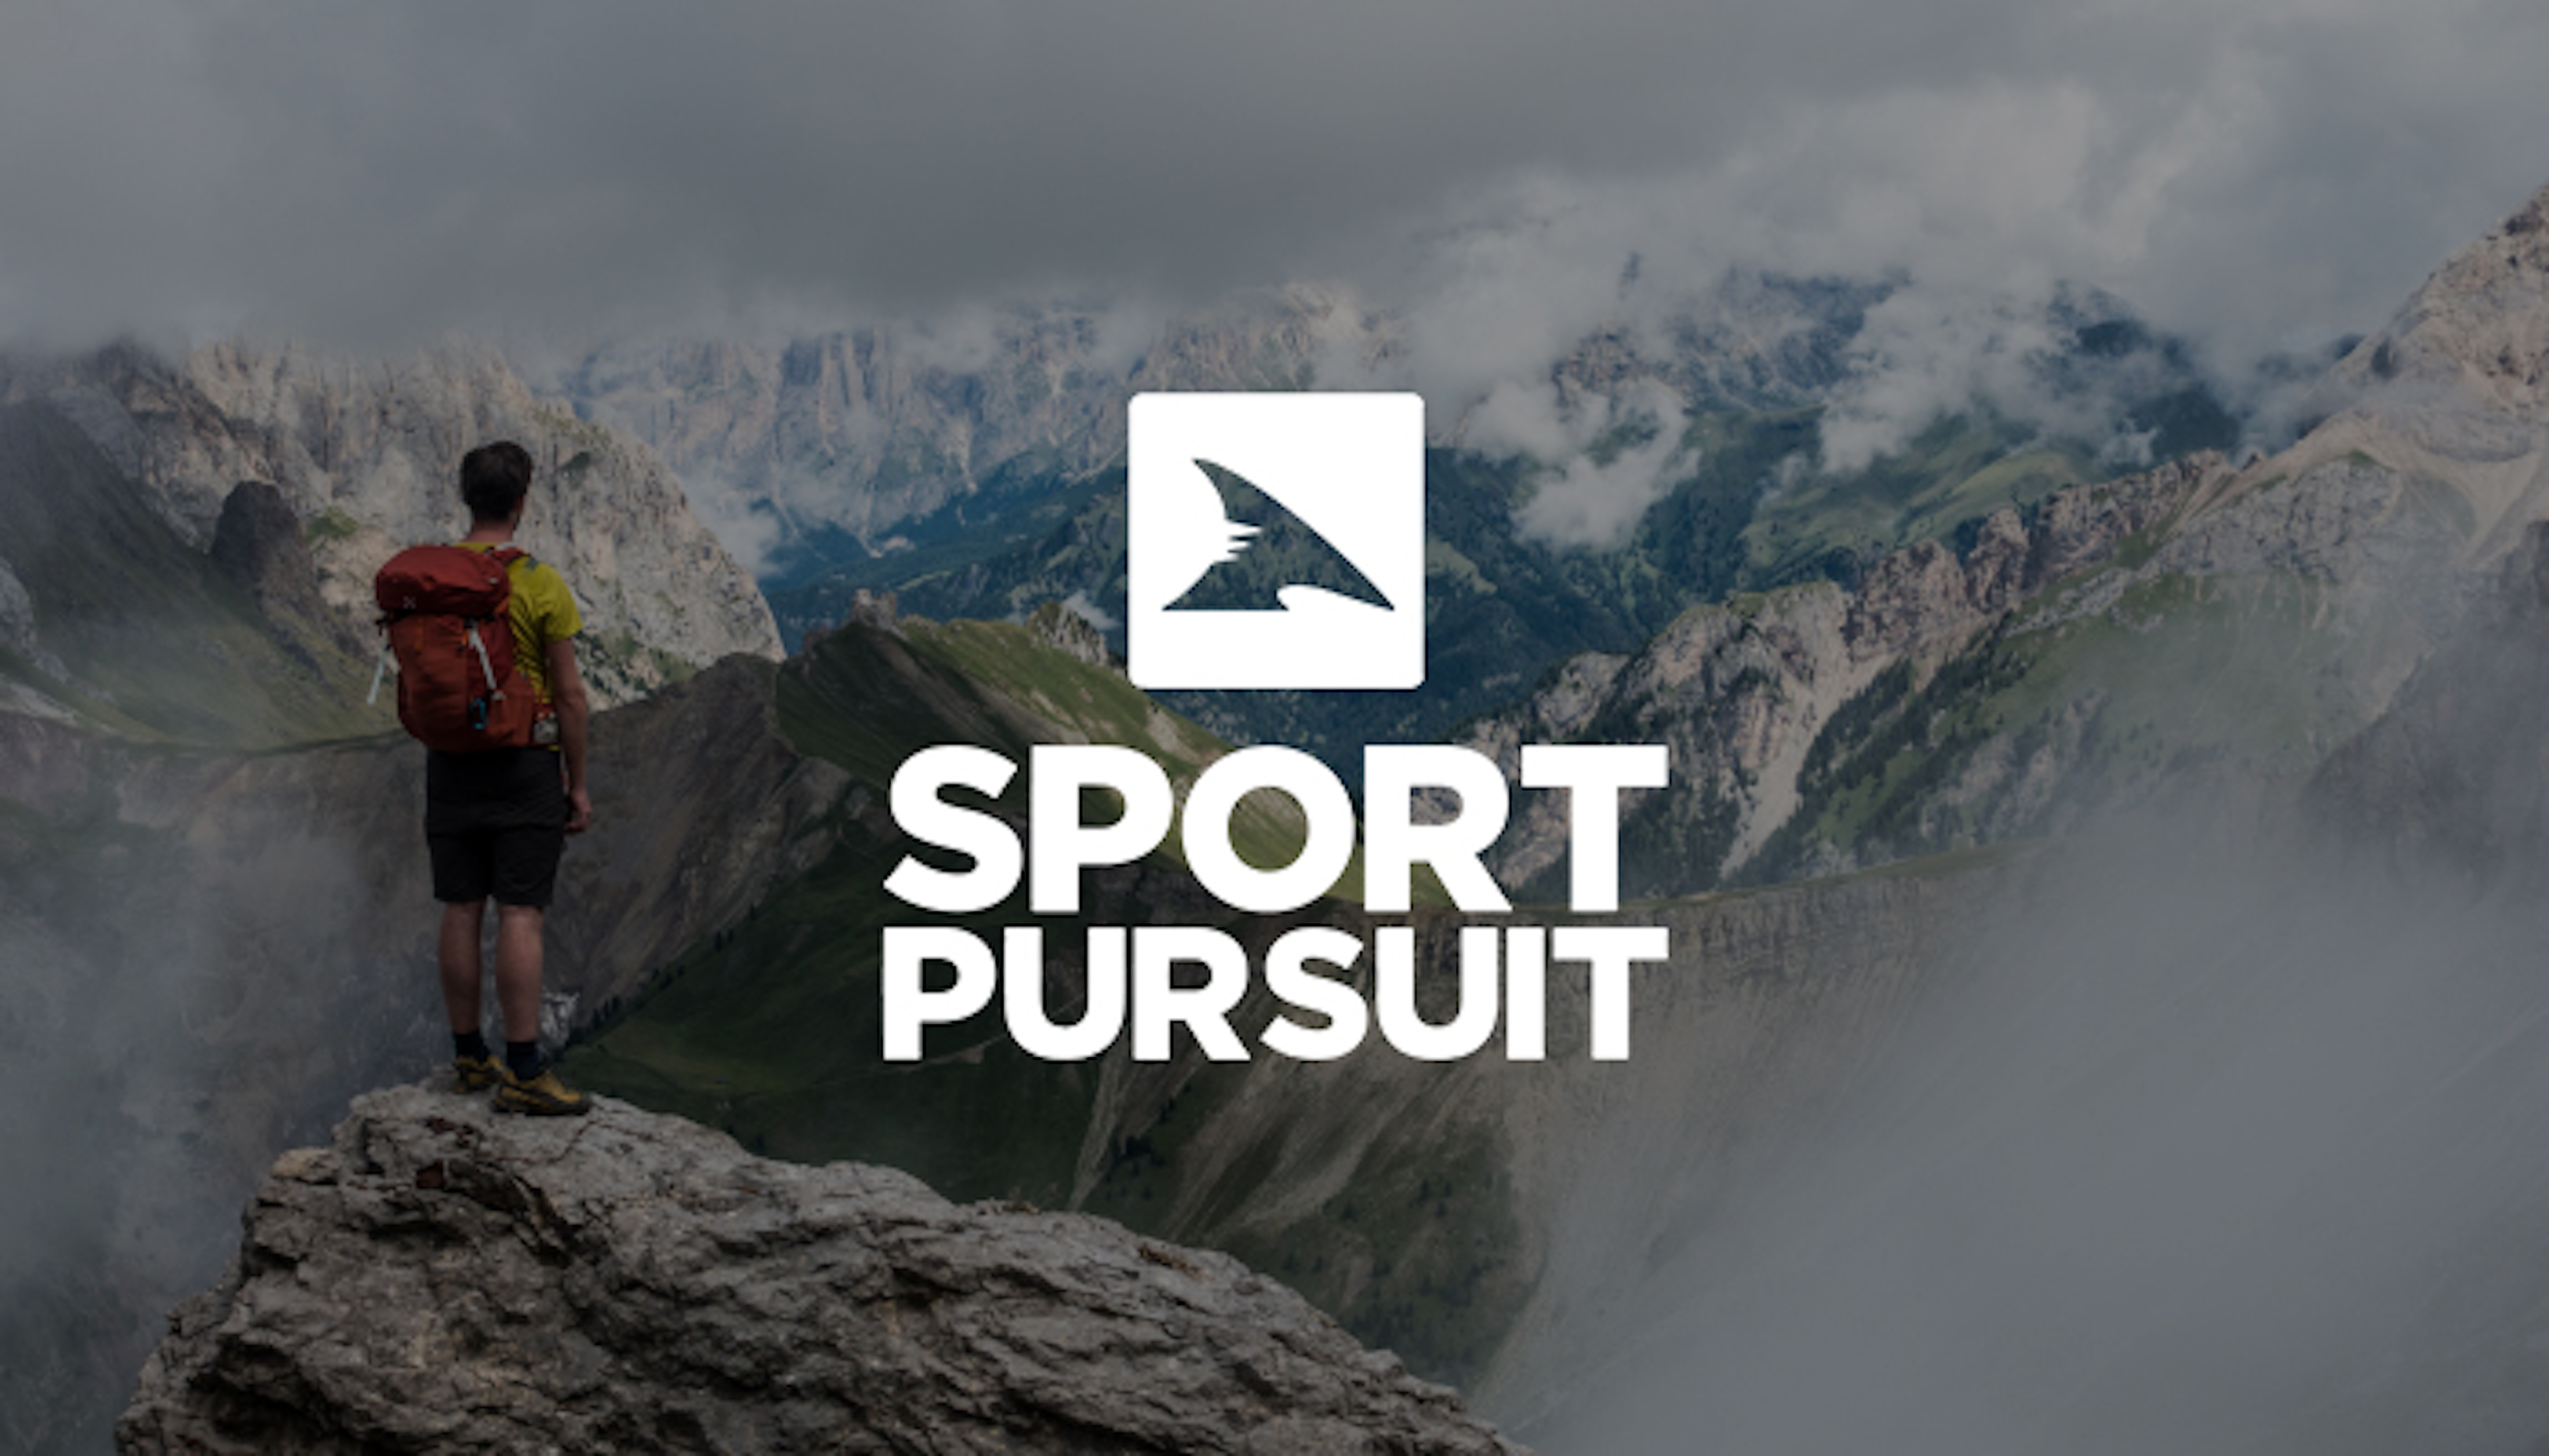 Reflections on 10 Year Partnership with SportPursuit